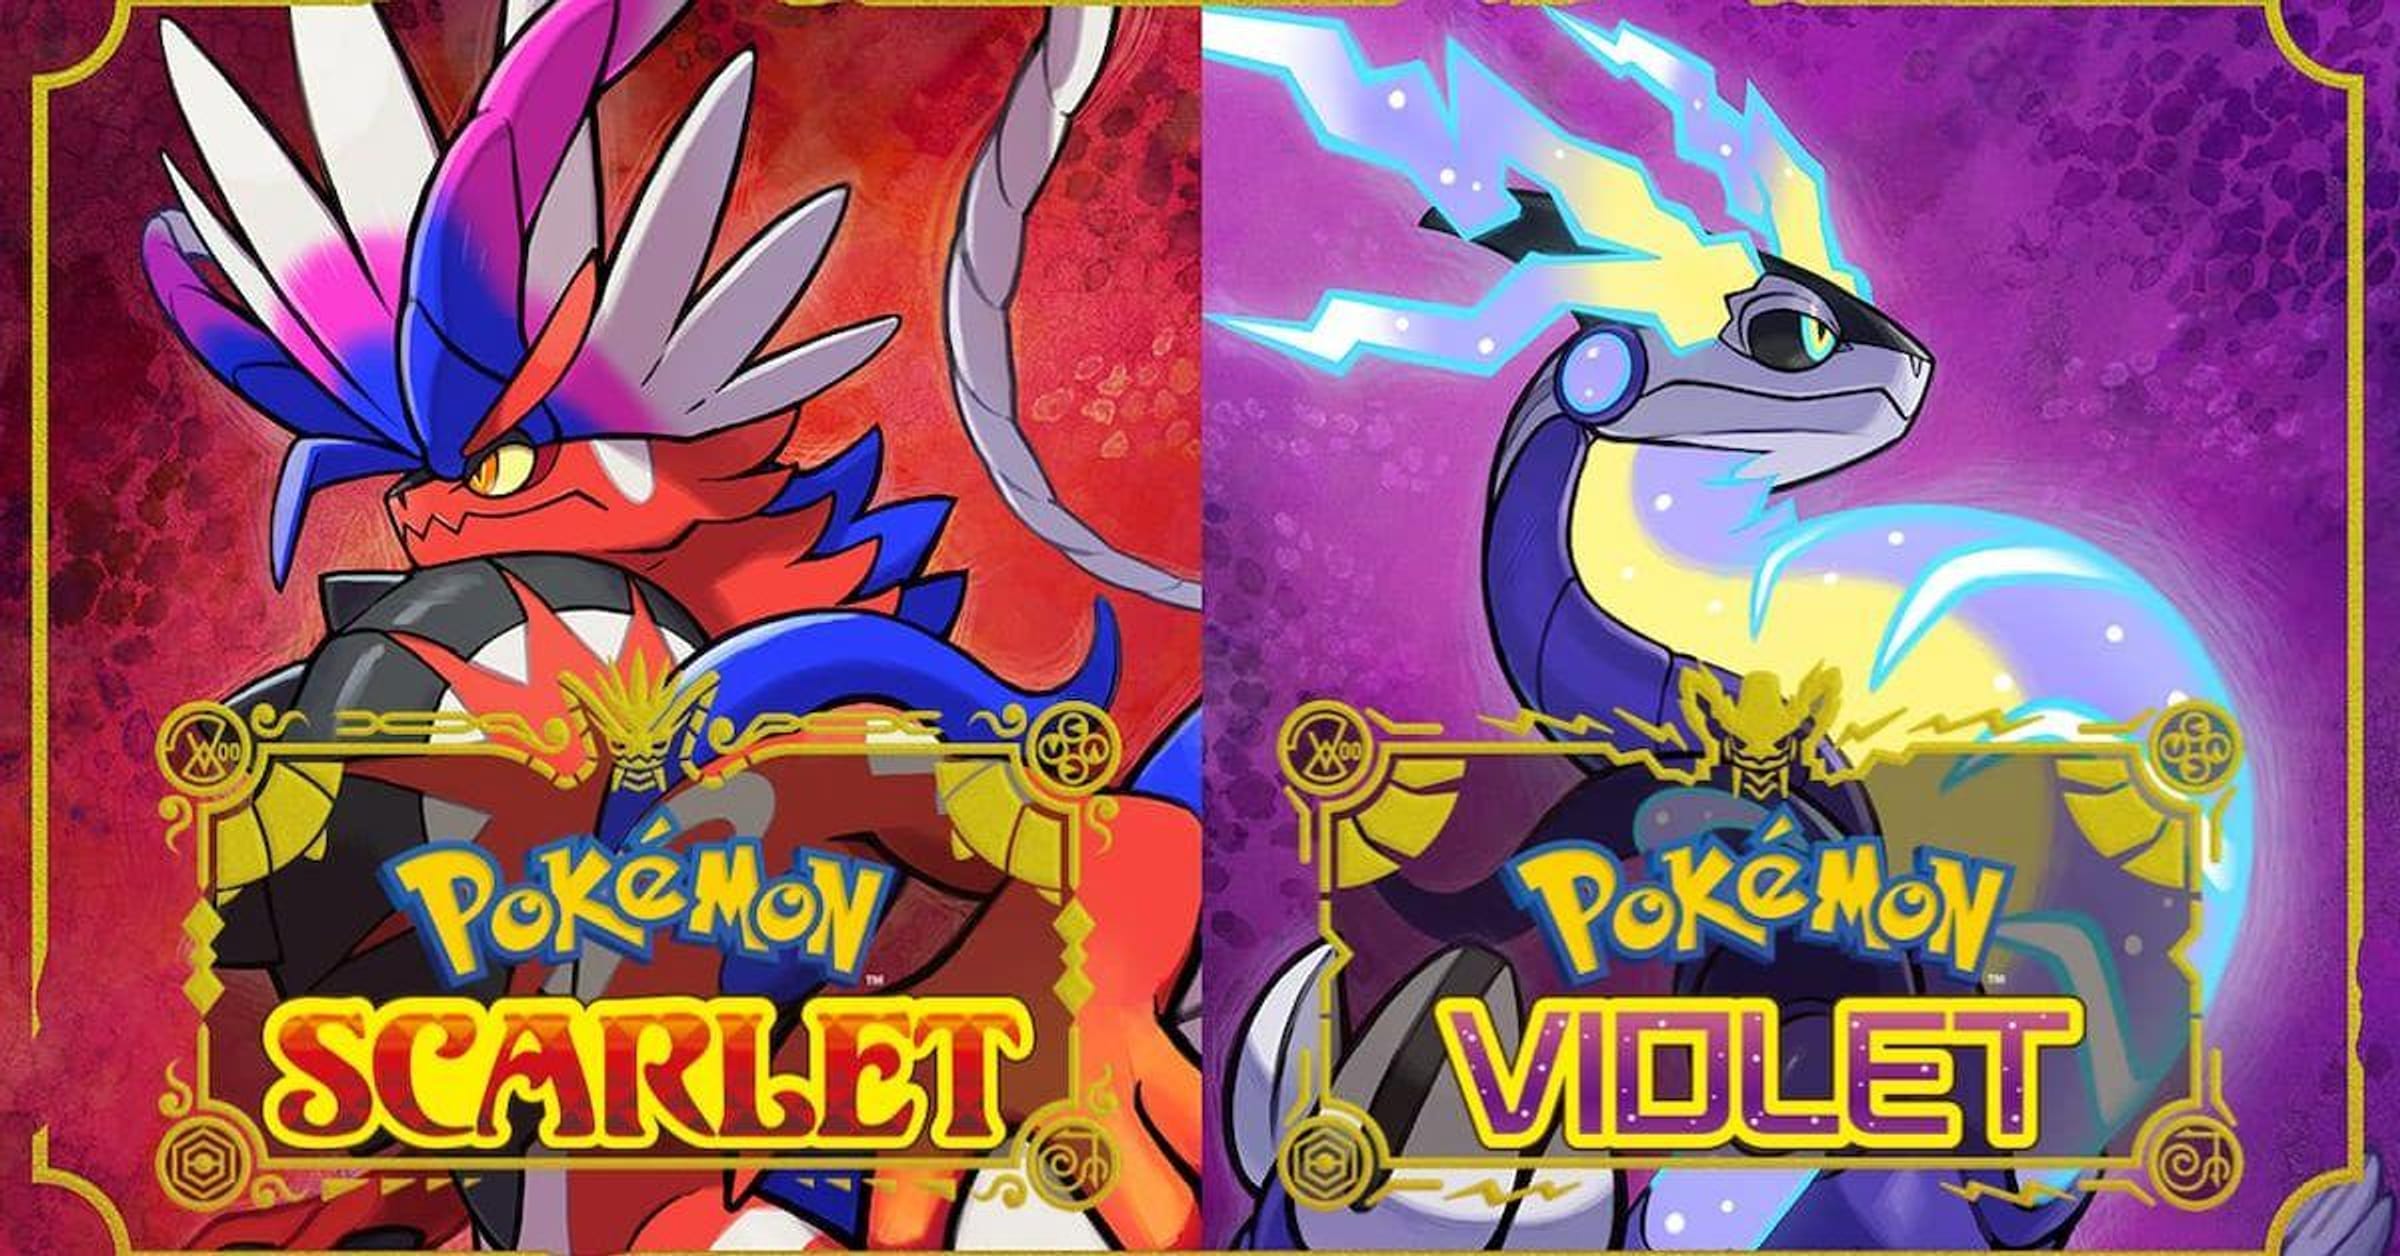 How To Get Annihilape In Pokemon Scarlet & Violet (The Easy Way)